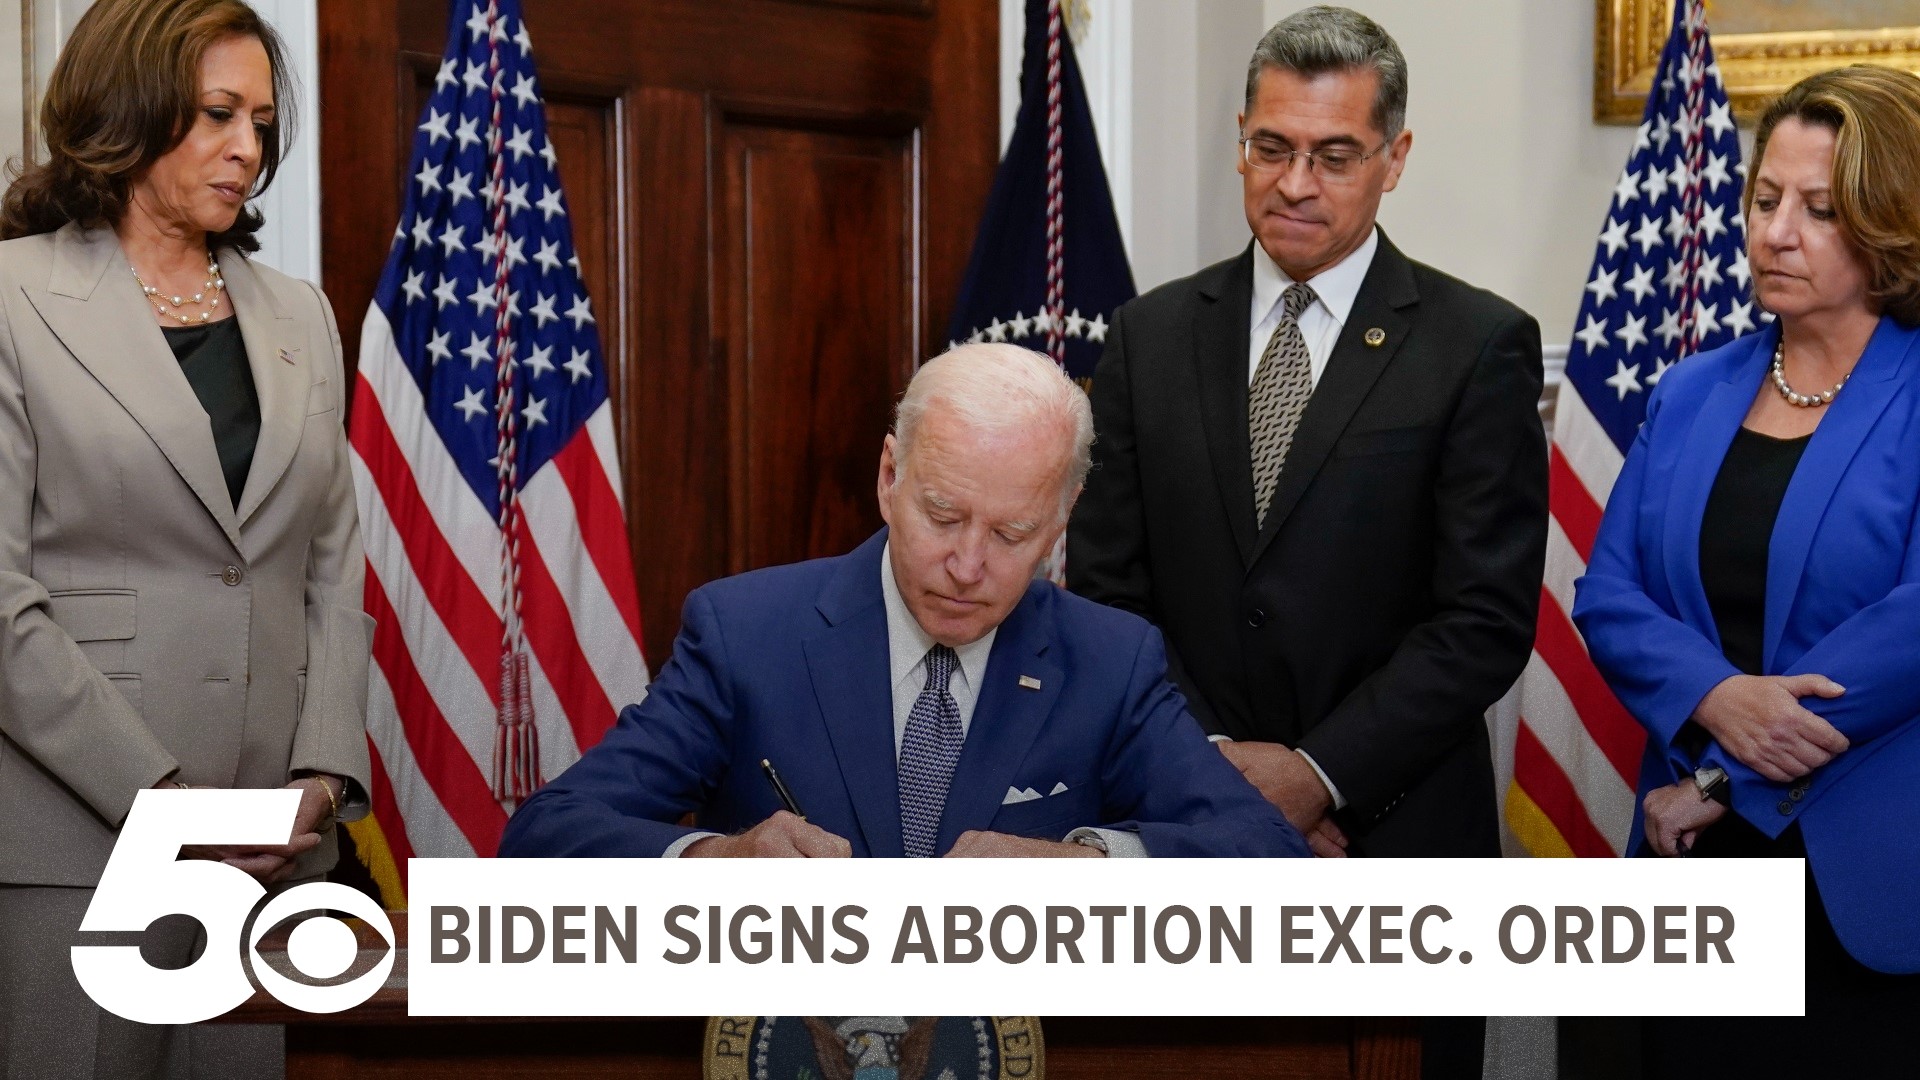 After President Biden signed an executive order Friday (July 8) protecting some abortion access, 5NEWS found out what that means for Arkansas.